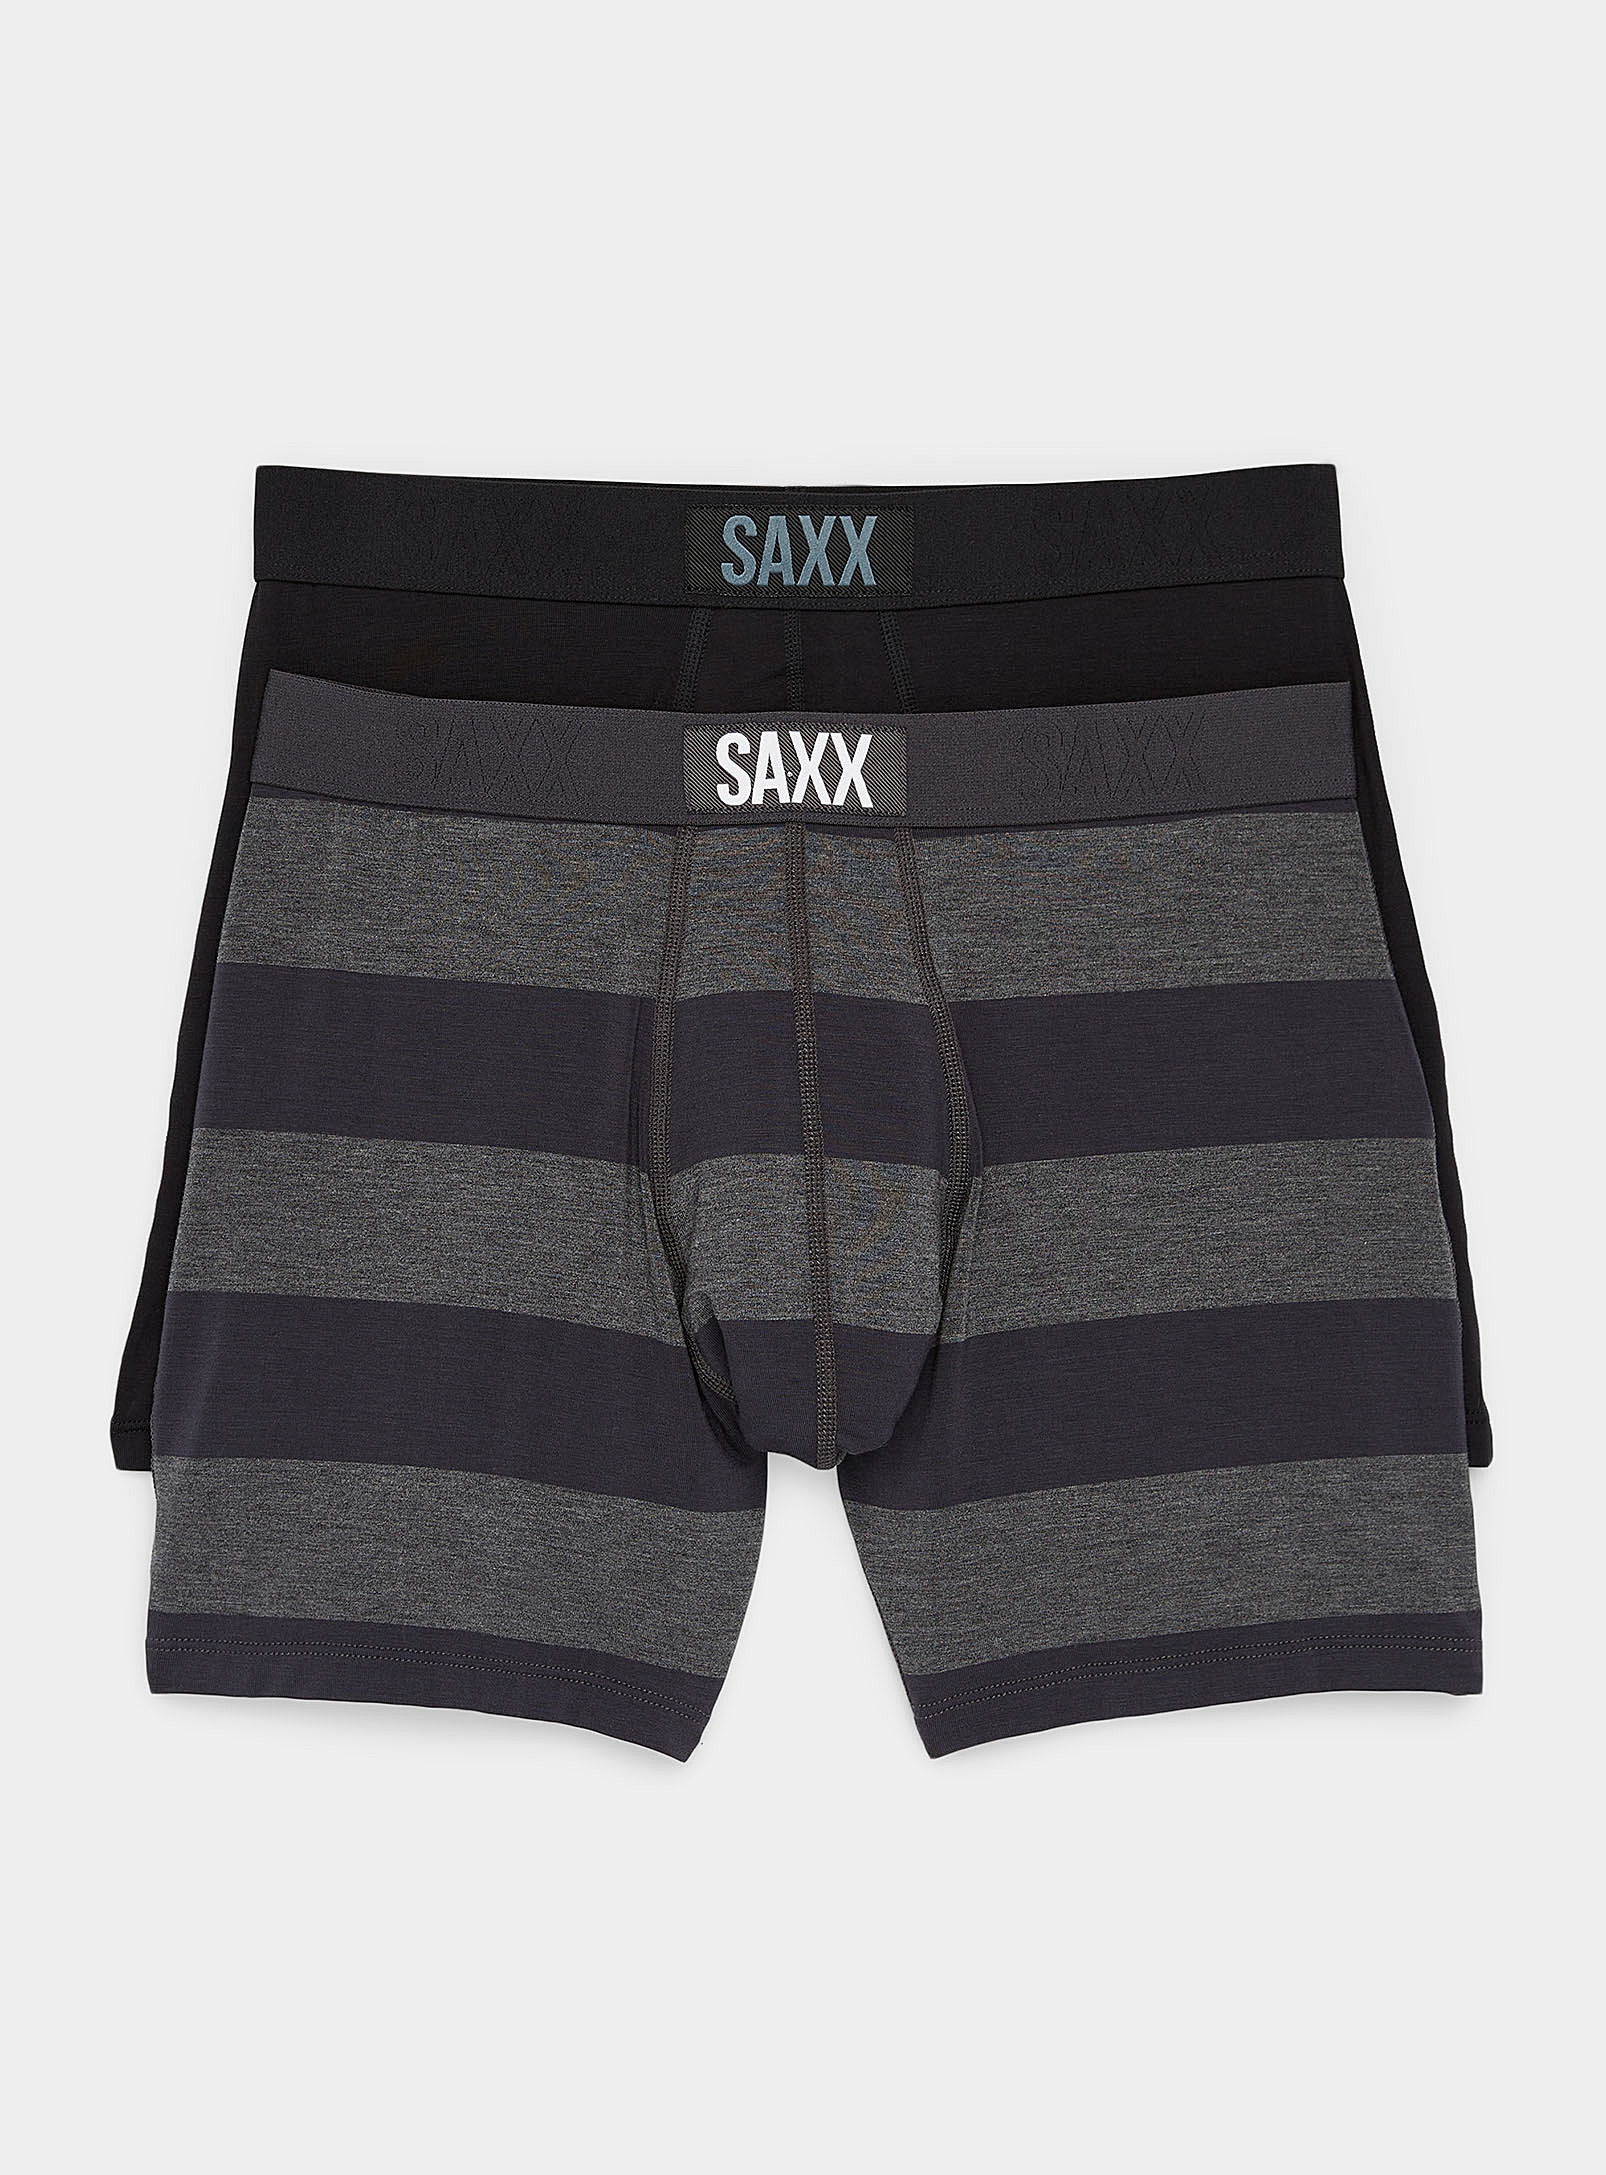 Saxx 2-pack In Patterned Black